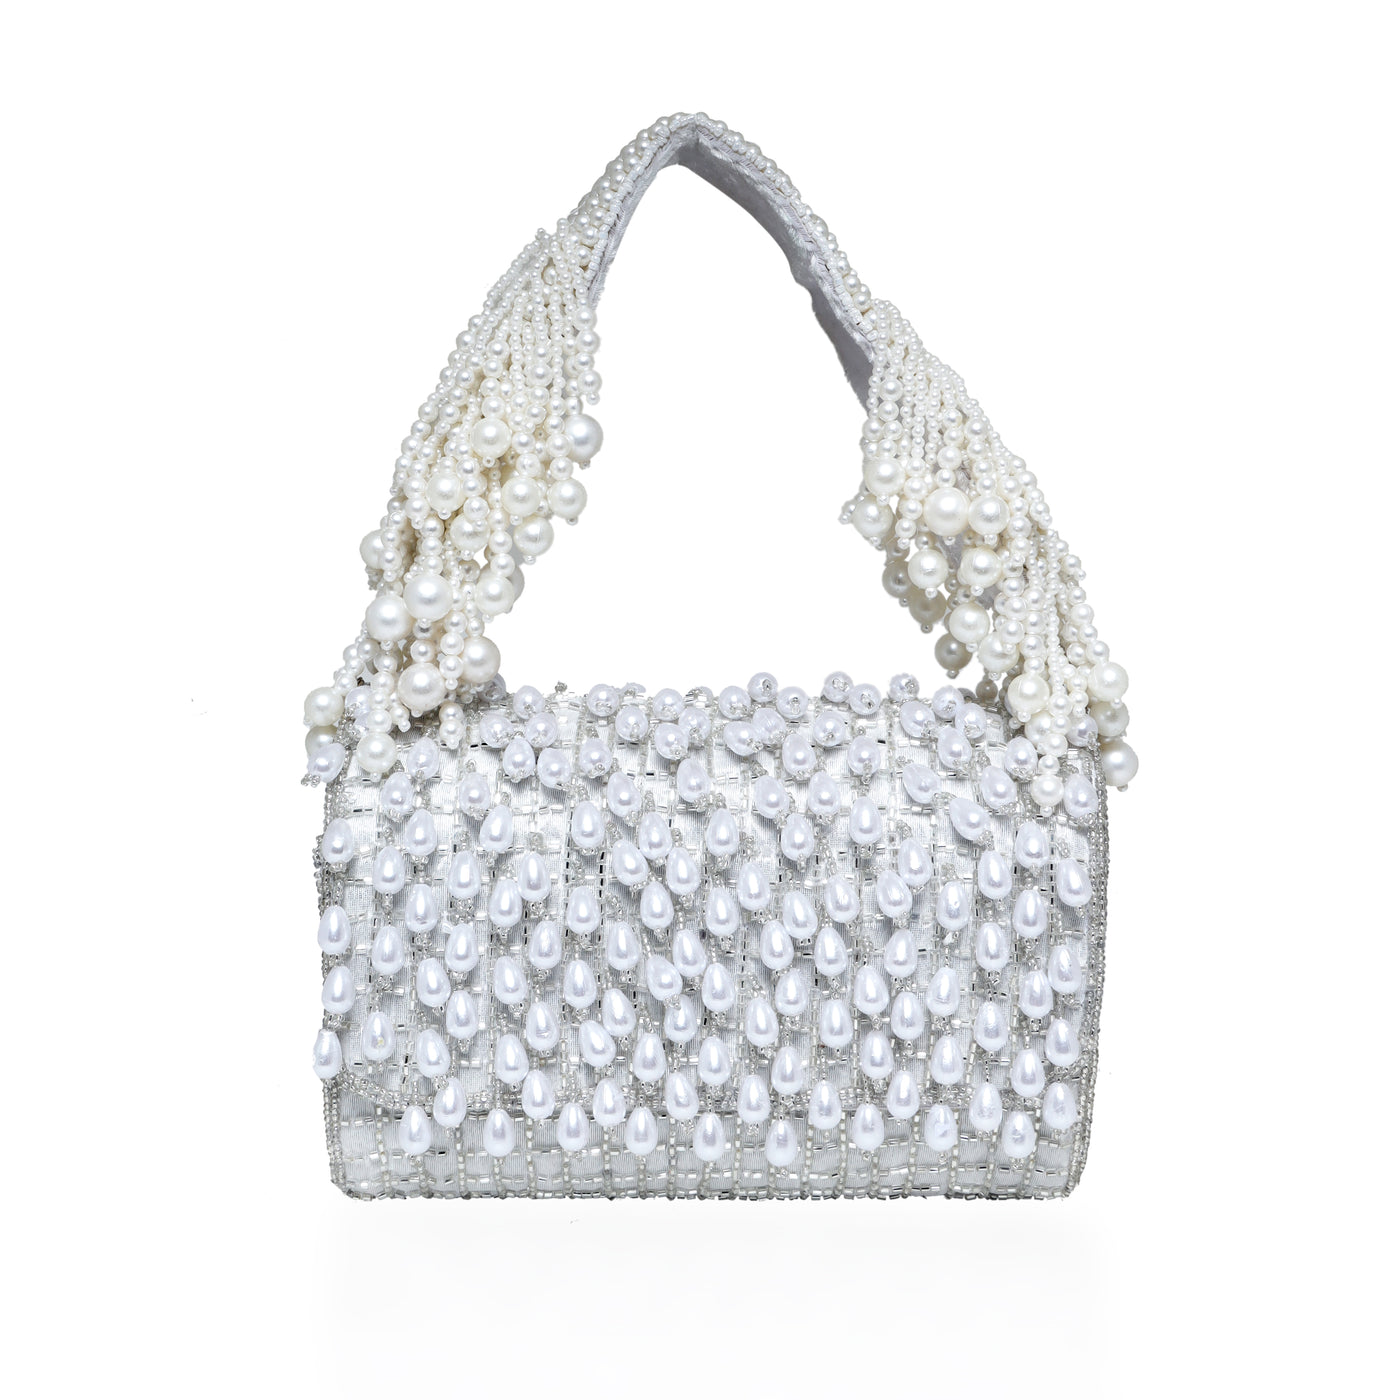 The Pearl Story Bag